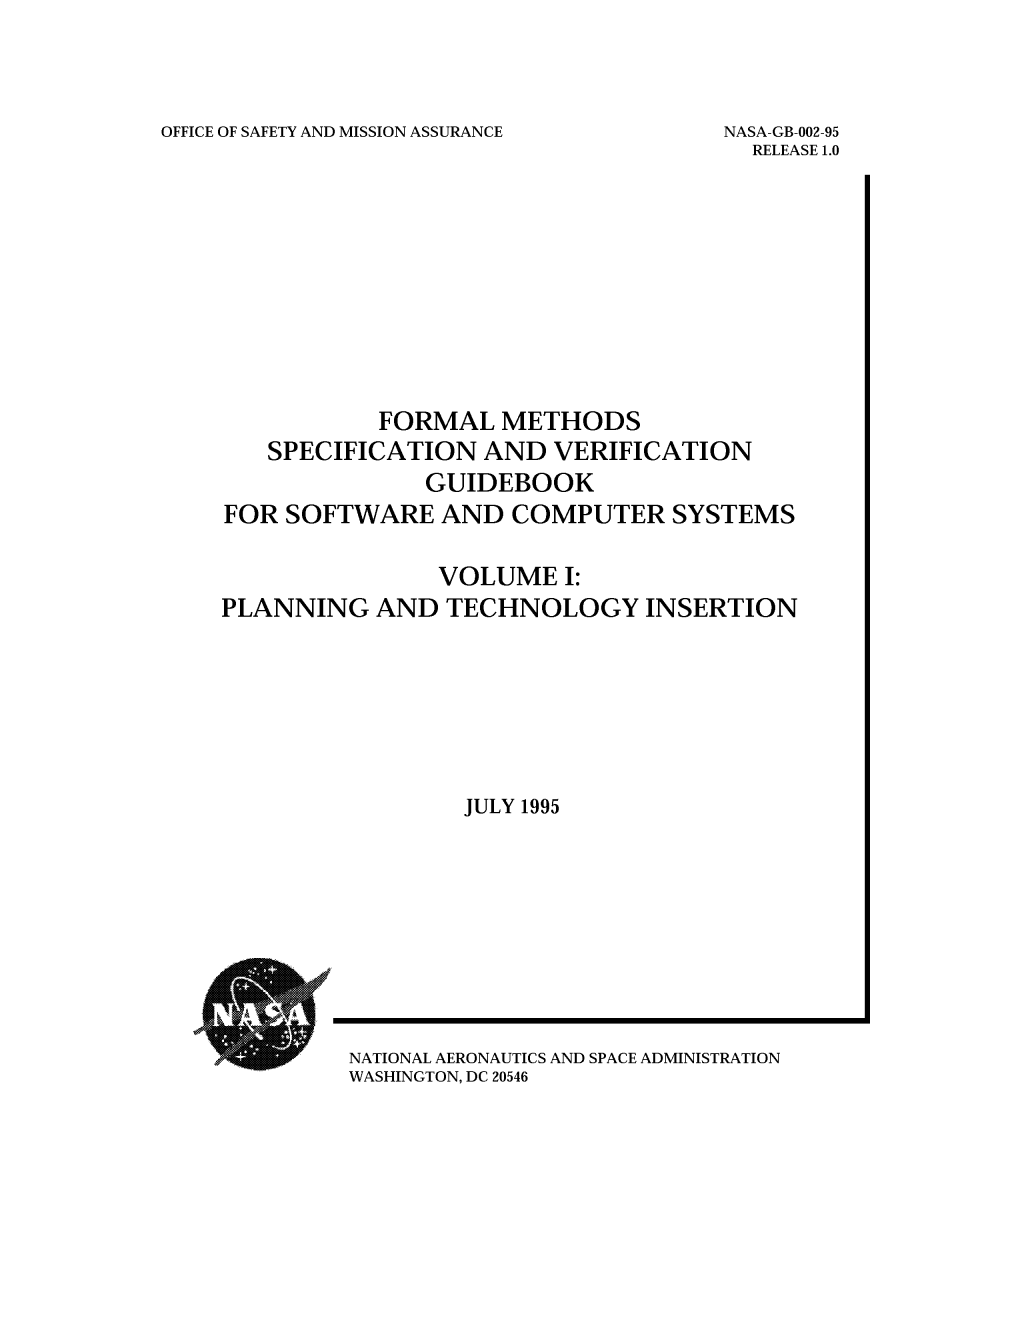 Formal Methods Specification and Verification Guidebook for Software and Computer Systems